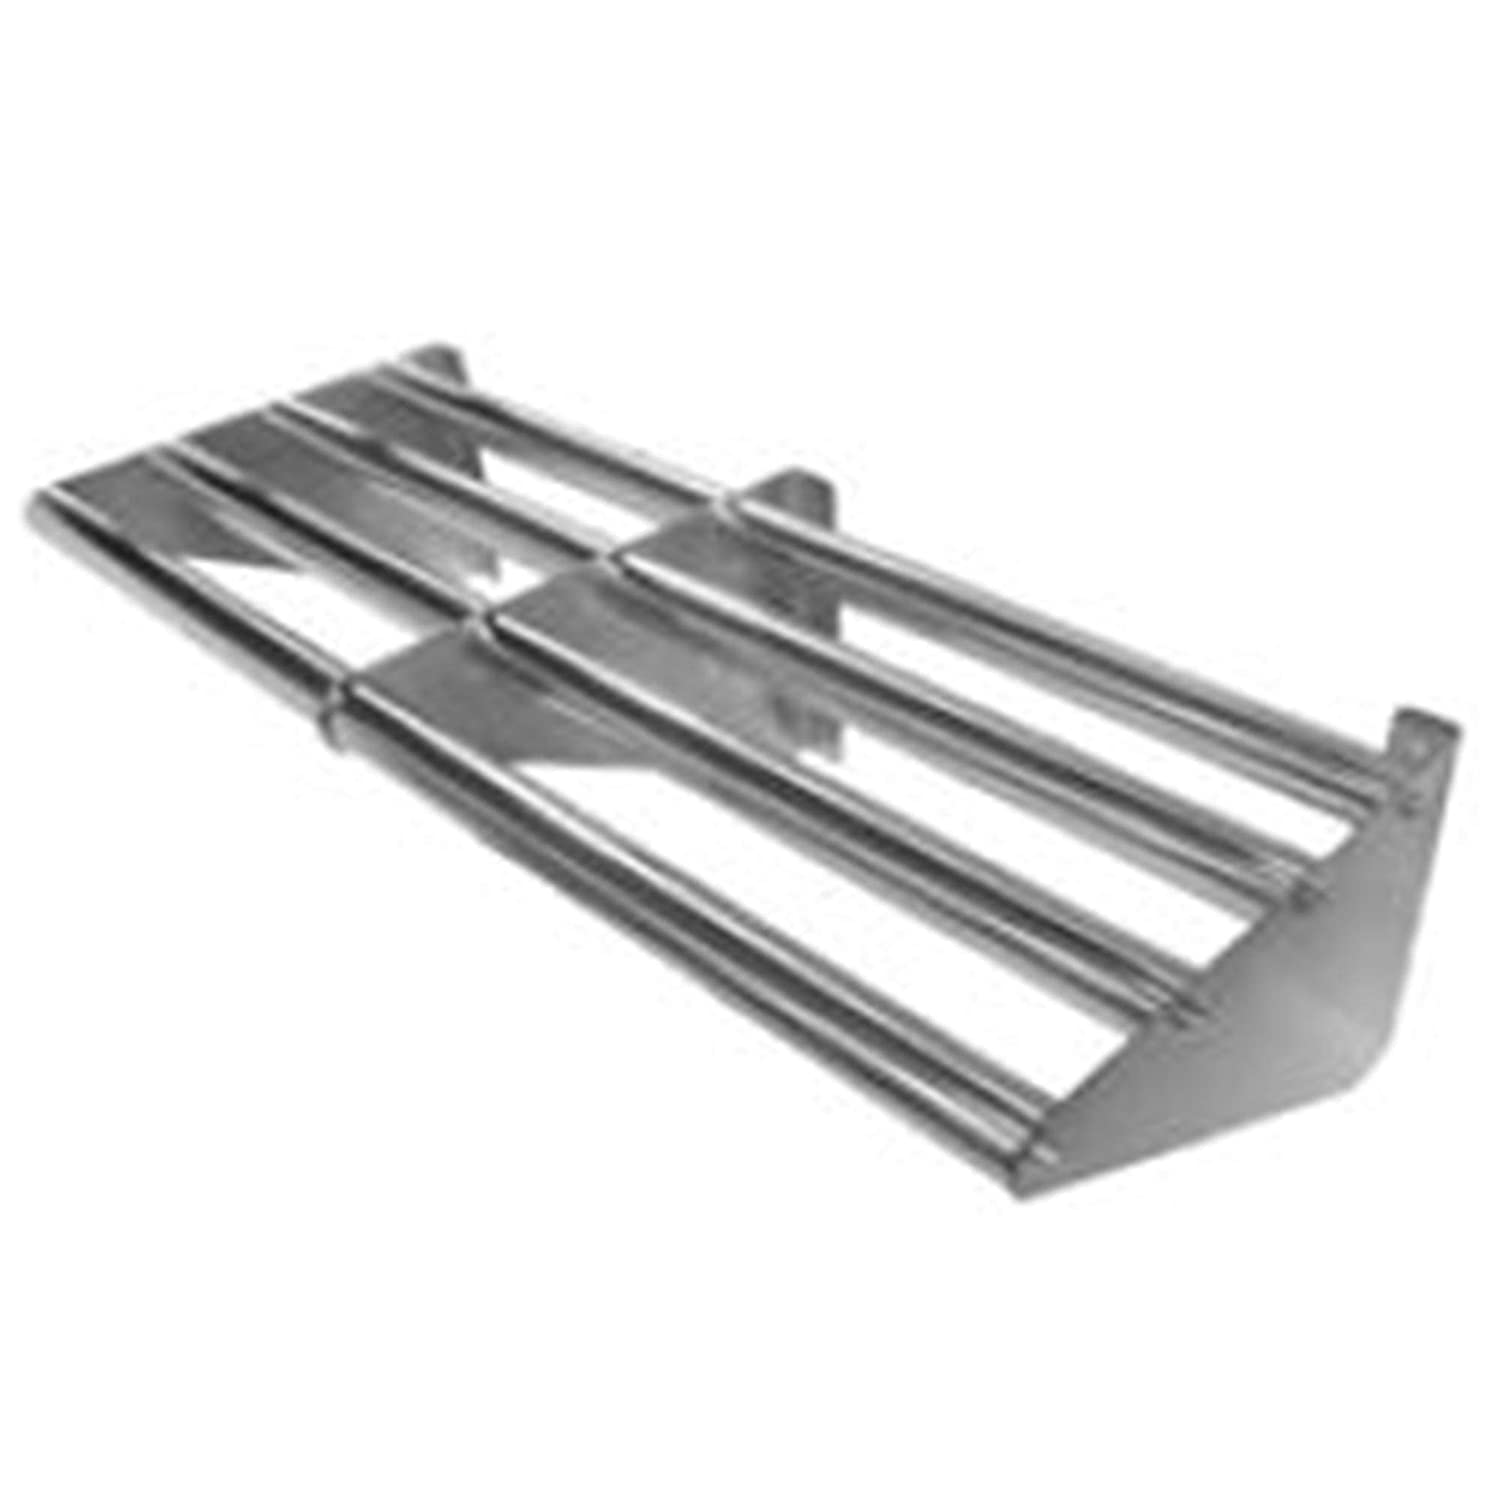 Stainless Steel Shower Caddy - The Vermont Country Store